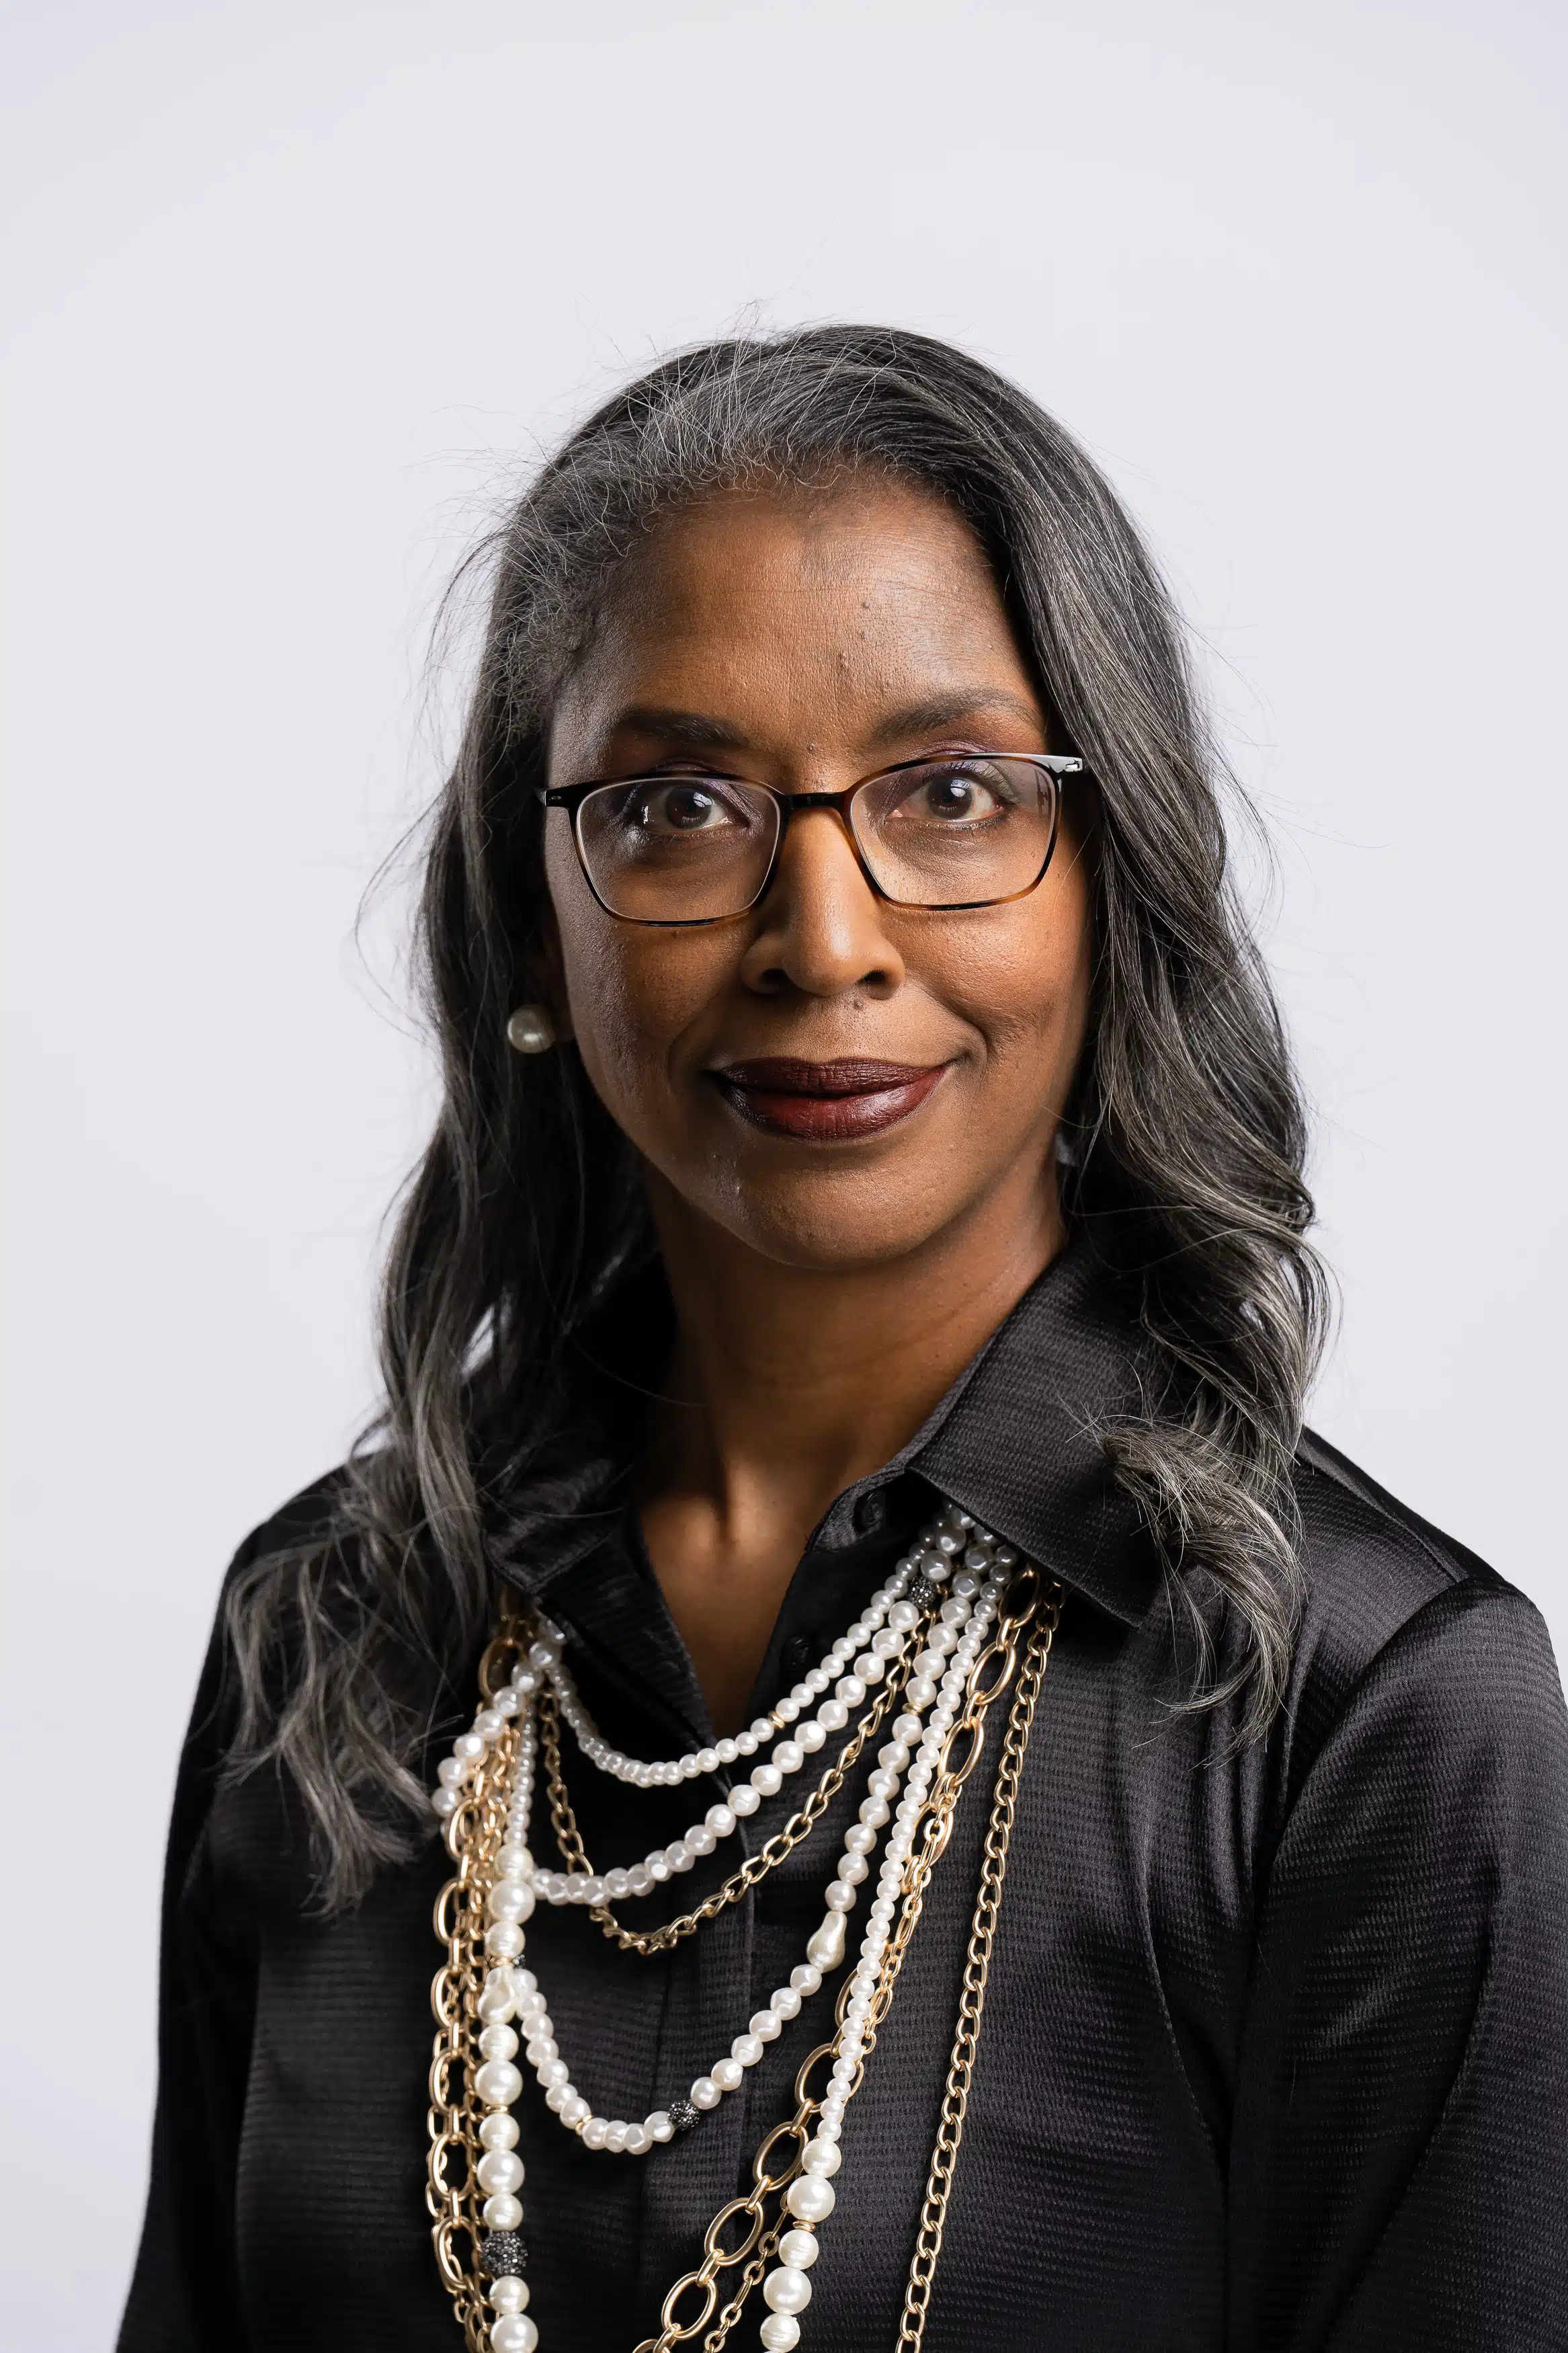 Woman at greenville country club wearing a business suit for a headshot photography session event that took part in the aka seriority